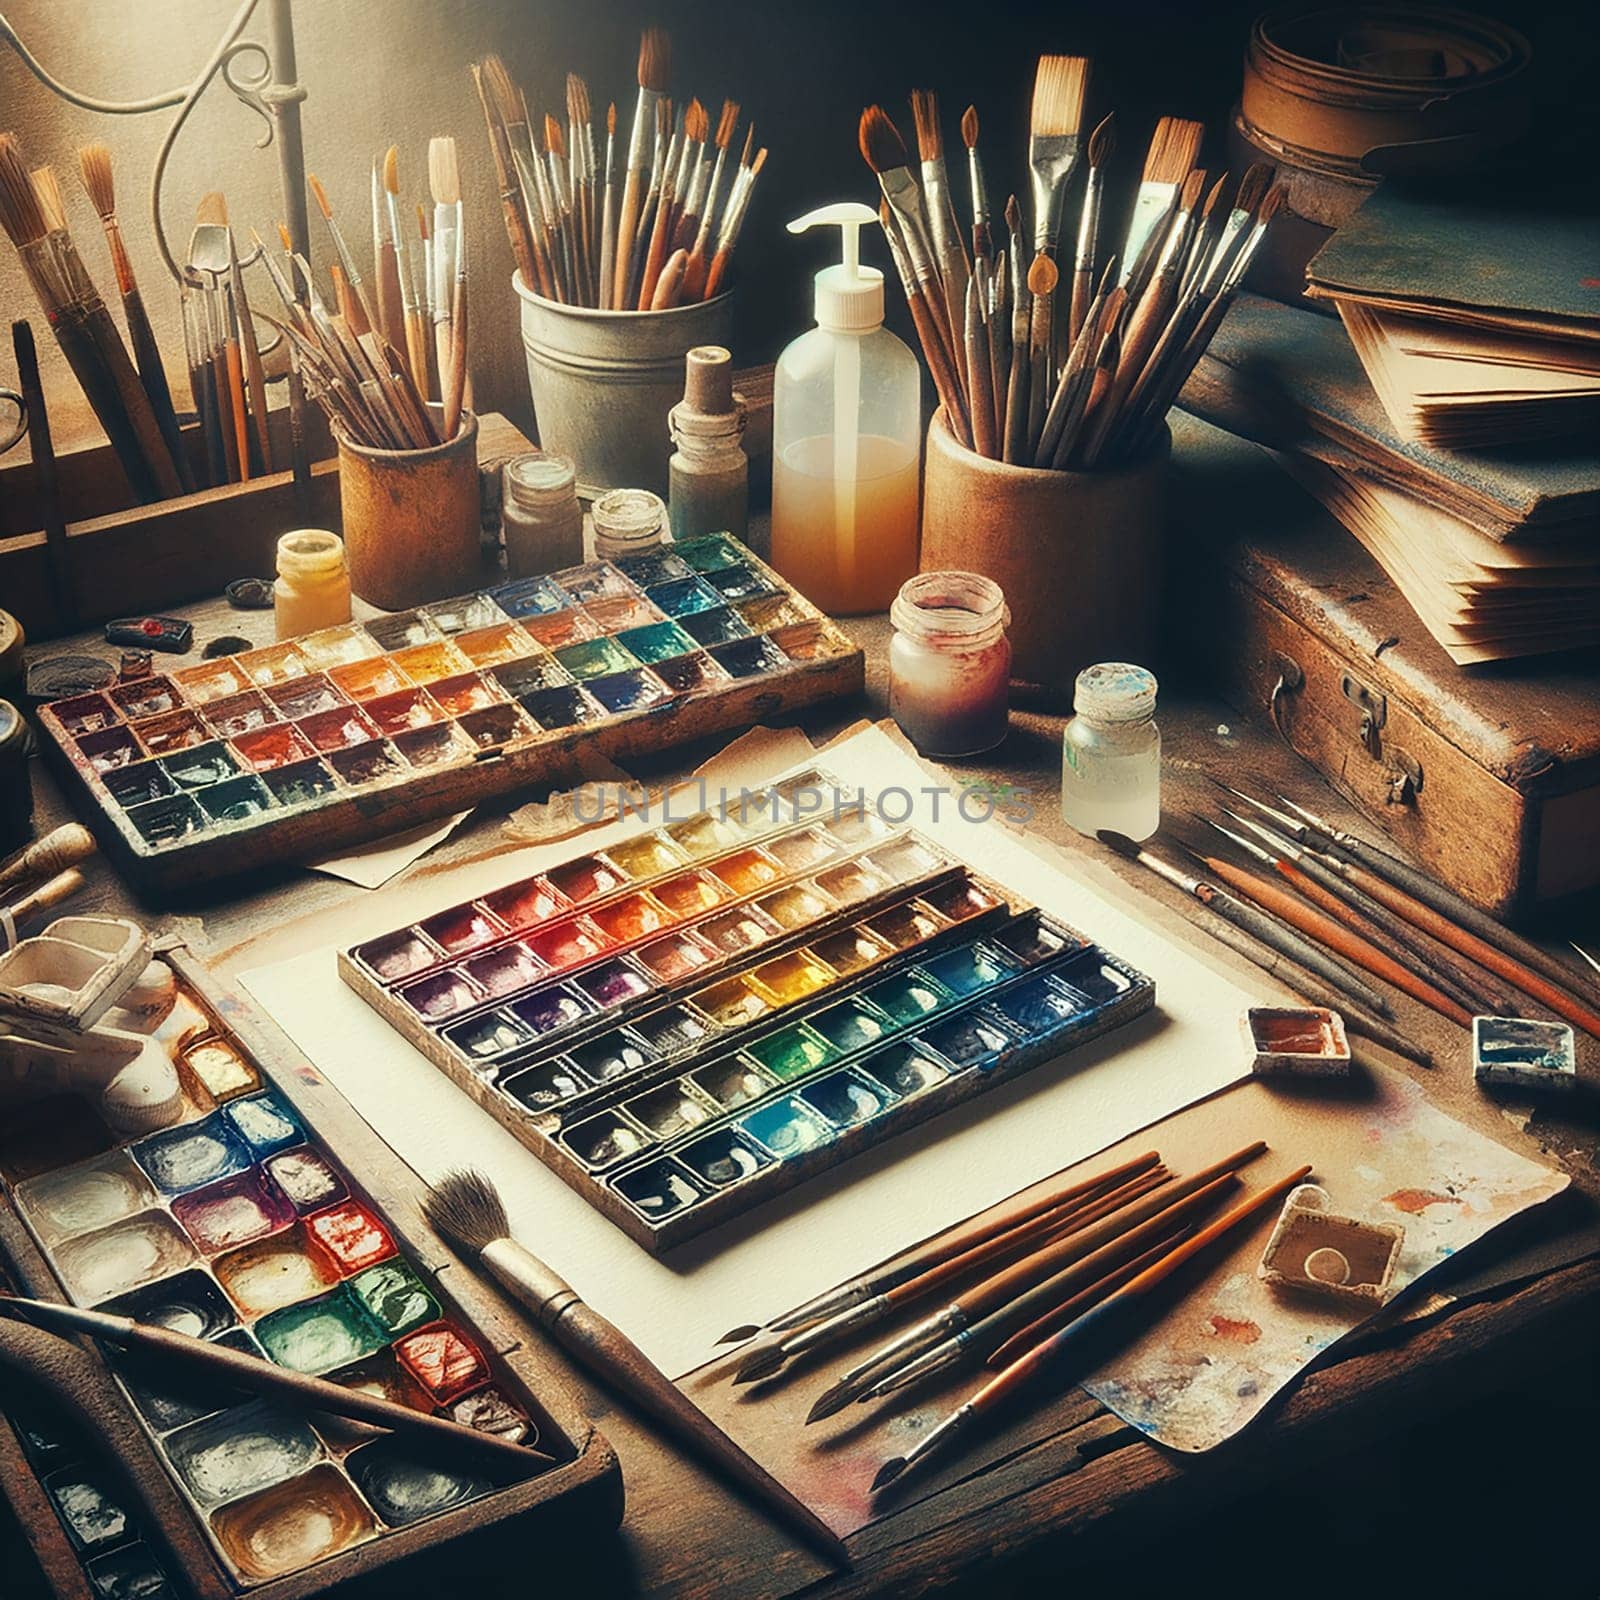 Unleash Your Creativity: Artistic Tools and Accessories in a Toned Picture